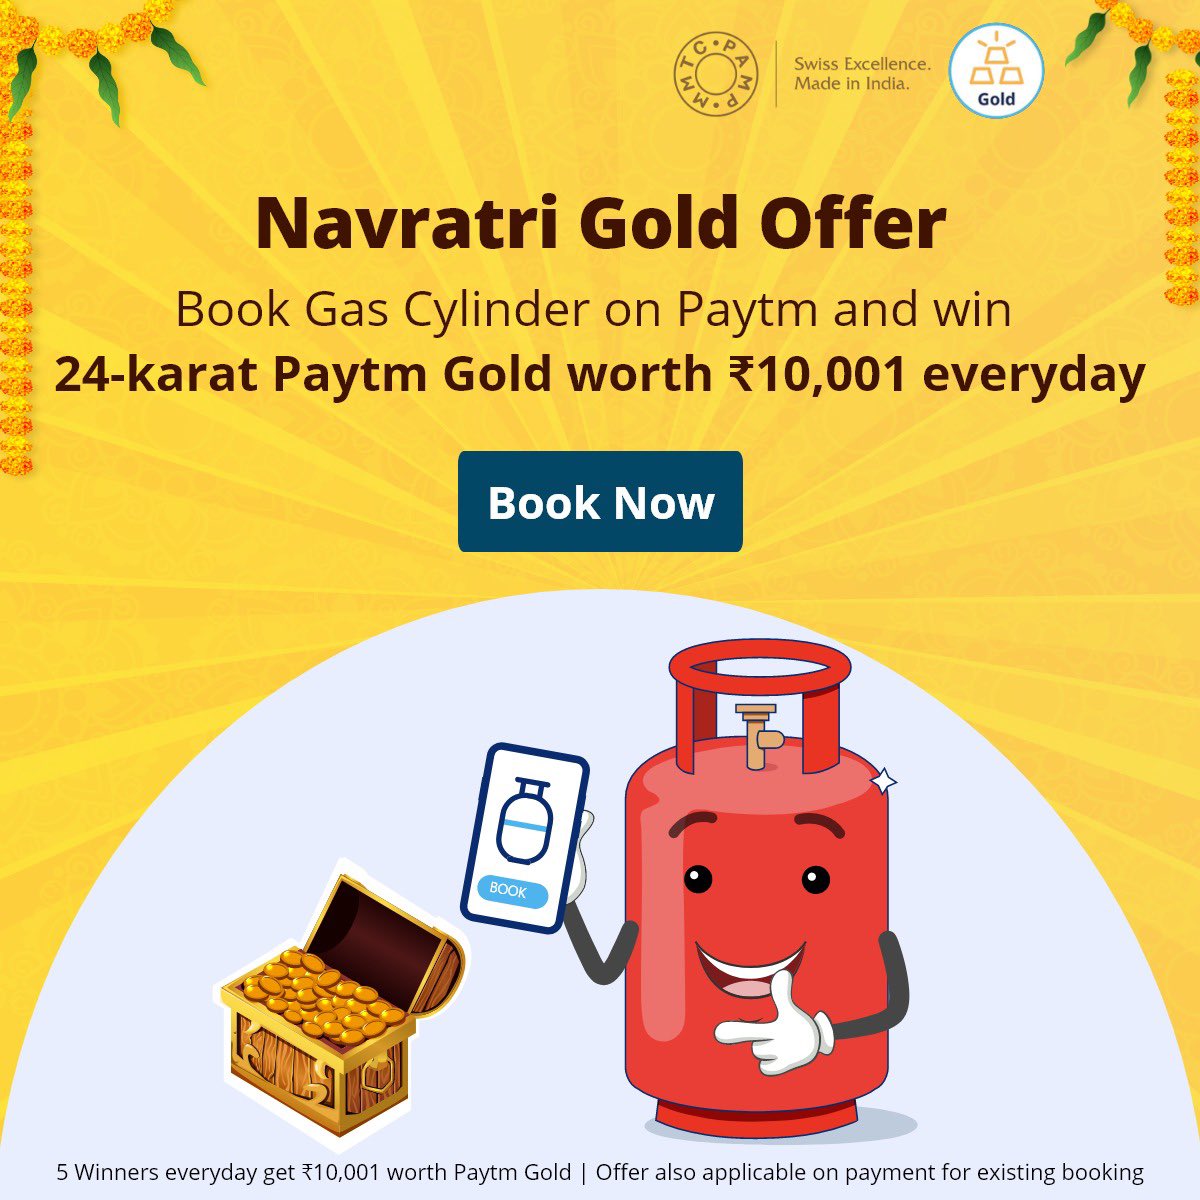 Time to win Gold!!
Book your #Bharatgas refill cylinders thru #Paytm and get a chance to win #24caratGold